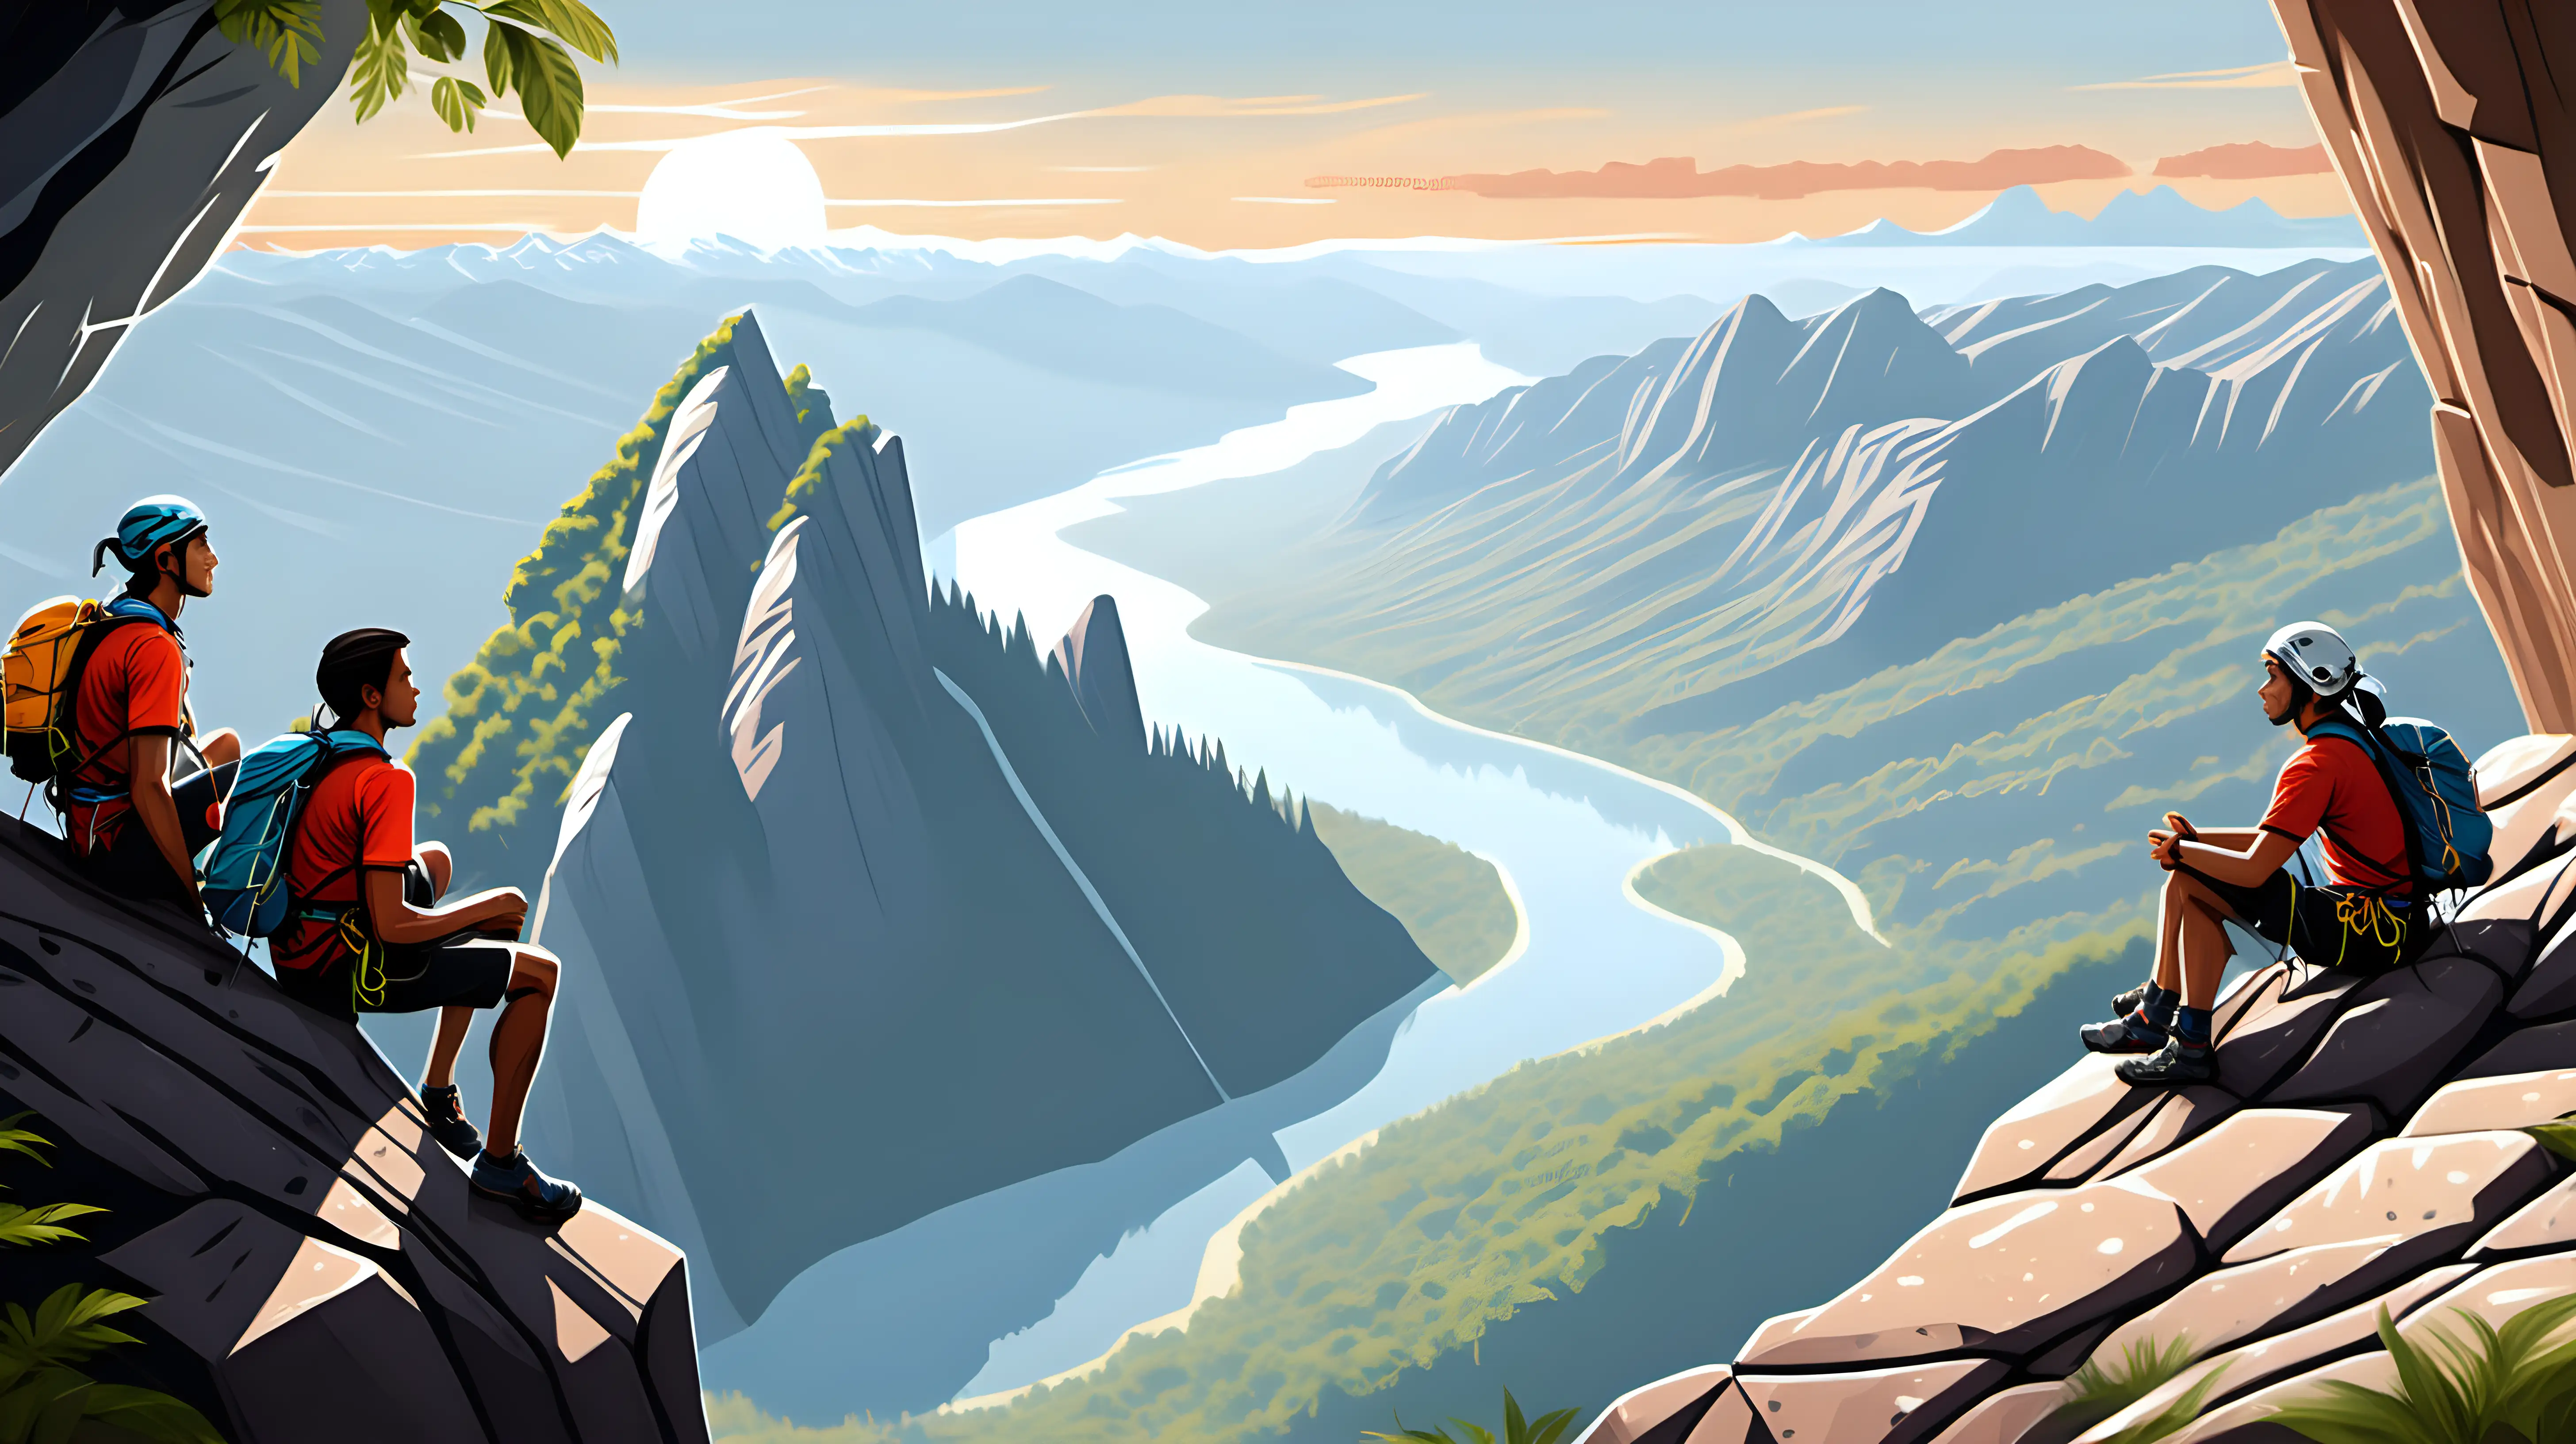 Illustrate a serene scene of climbers relaxing after a climb, sitting together on a rocky ledge, enjoying the breathtaking view.